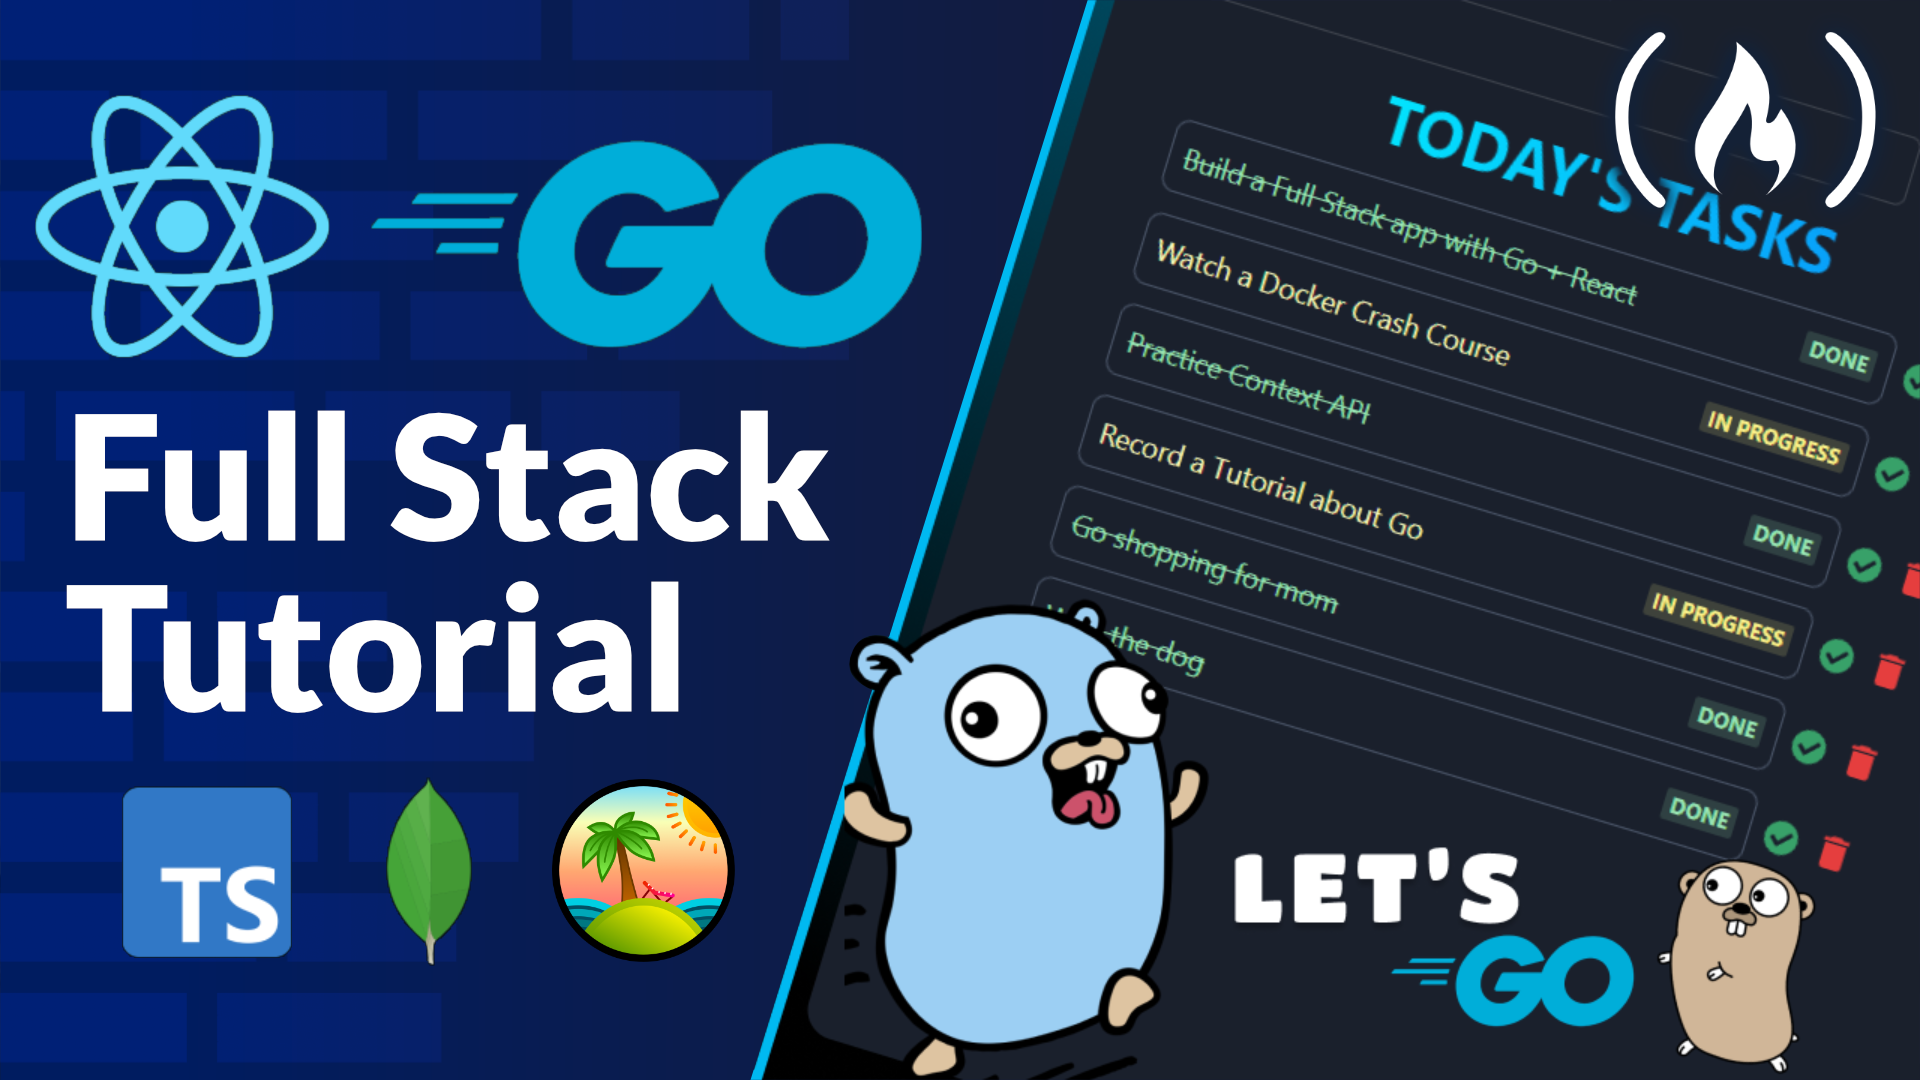 Learn the Basics of Go by Building a Full Stack Web App with React and Go